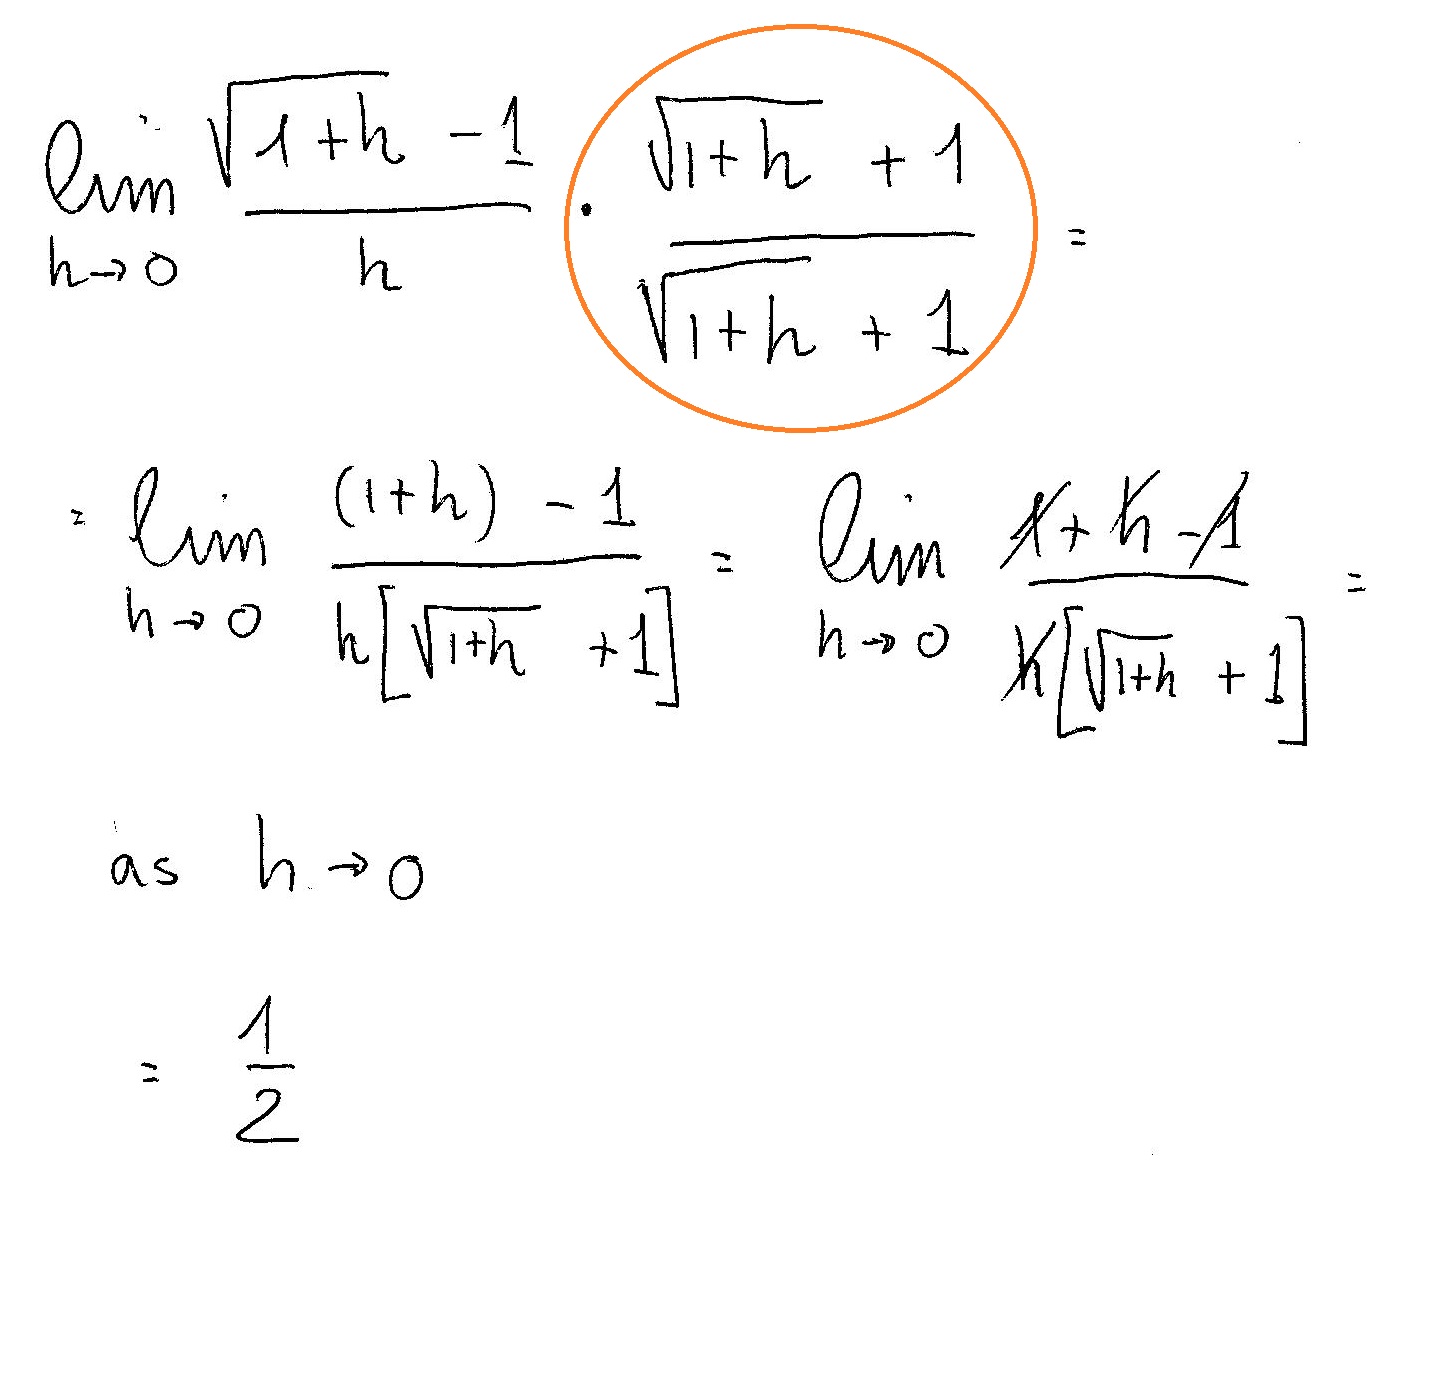 How do you find the limit of (sqrt(25+h)-25)/h as h approaches 25